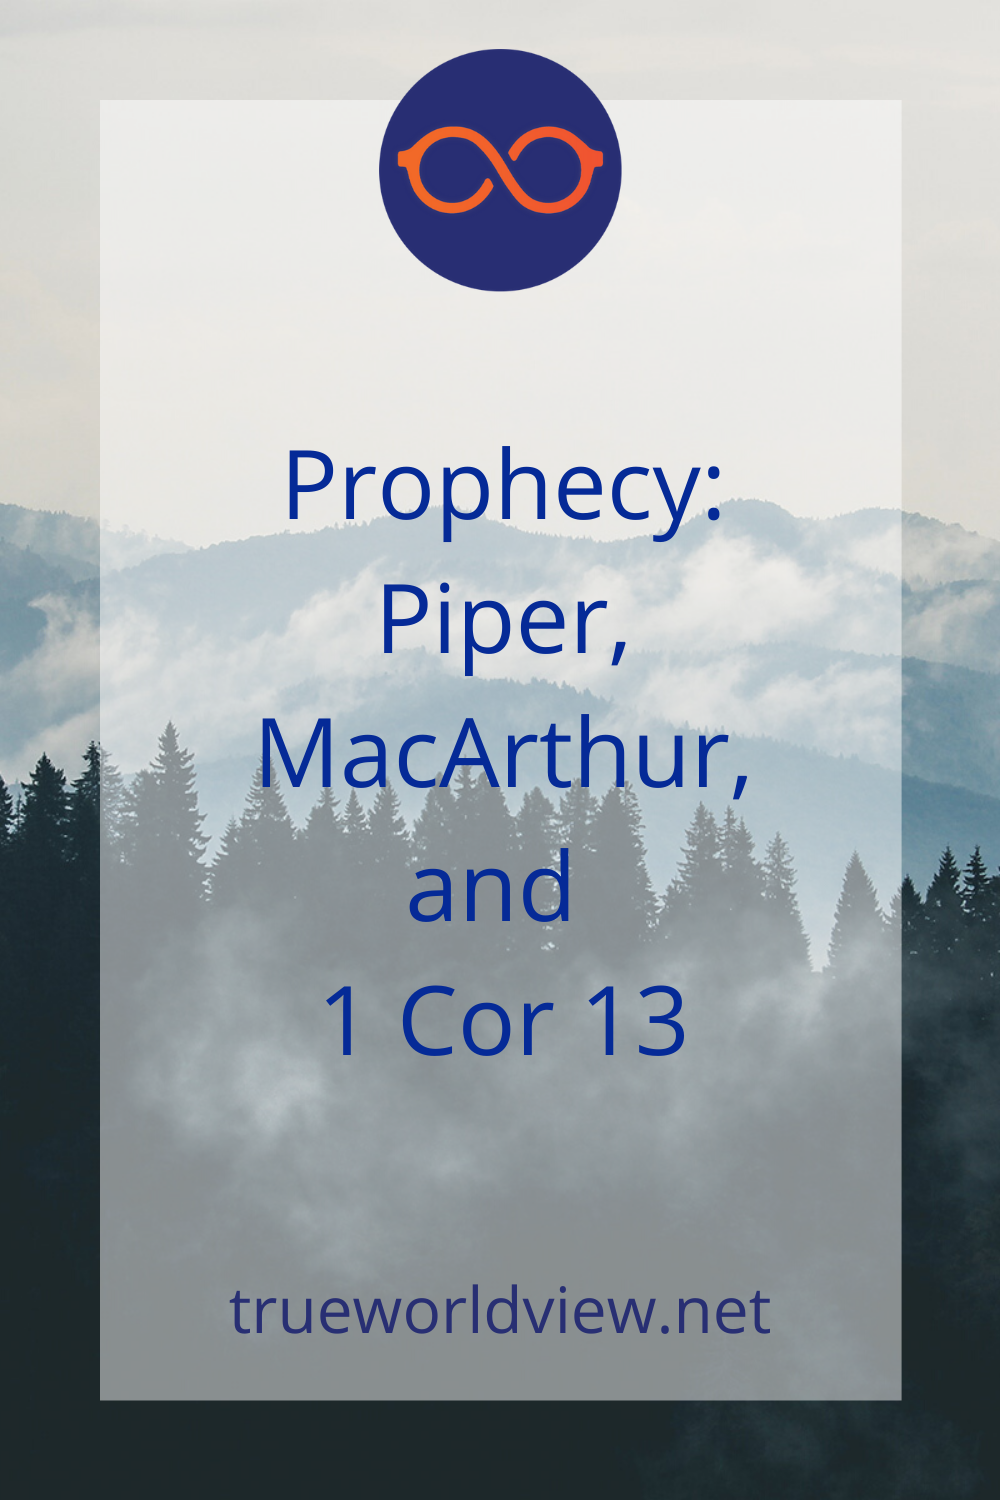 Prophecy: Piper, MacArthur, and 1 Cor 13